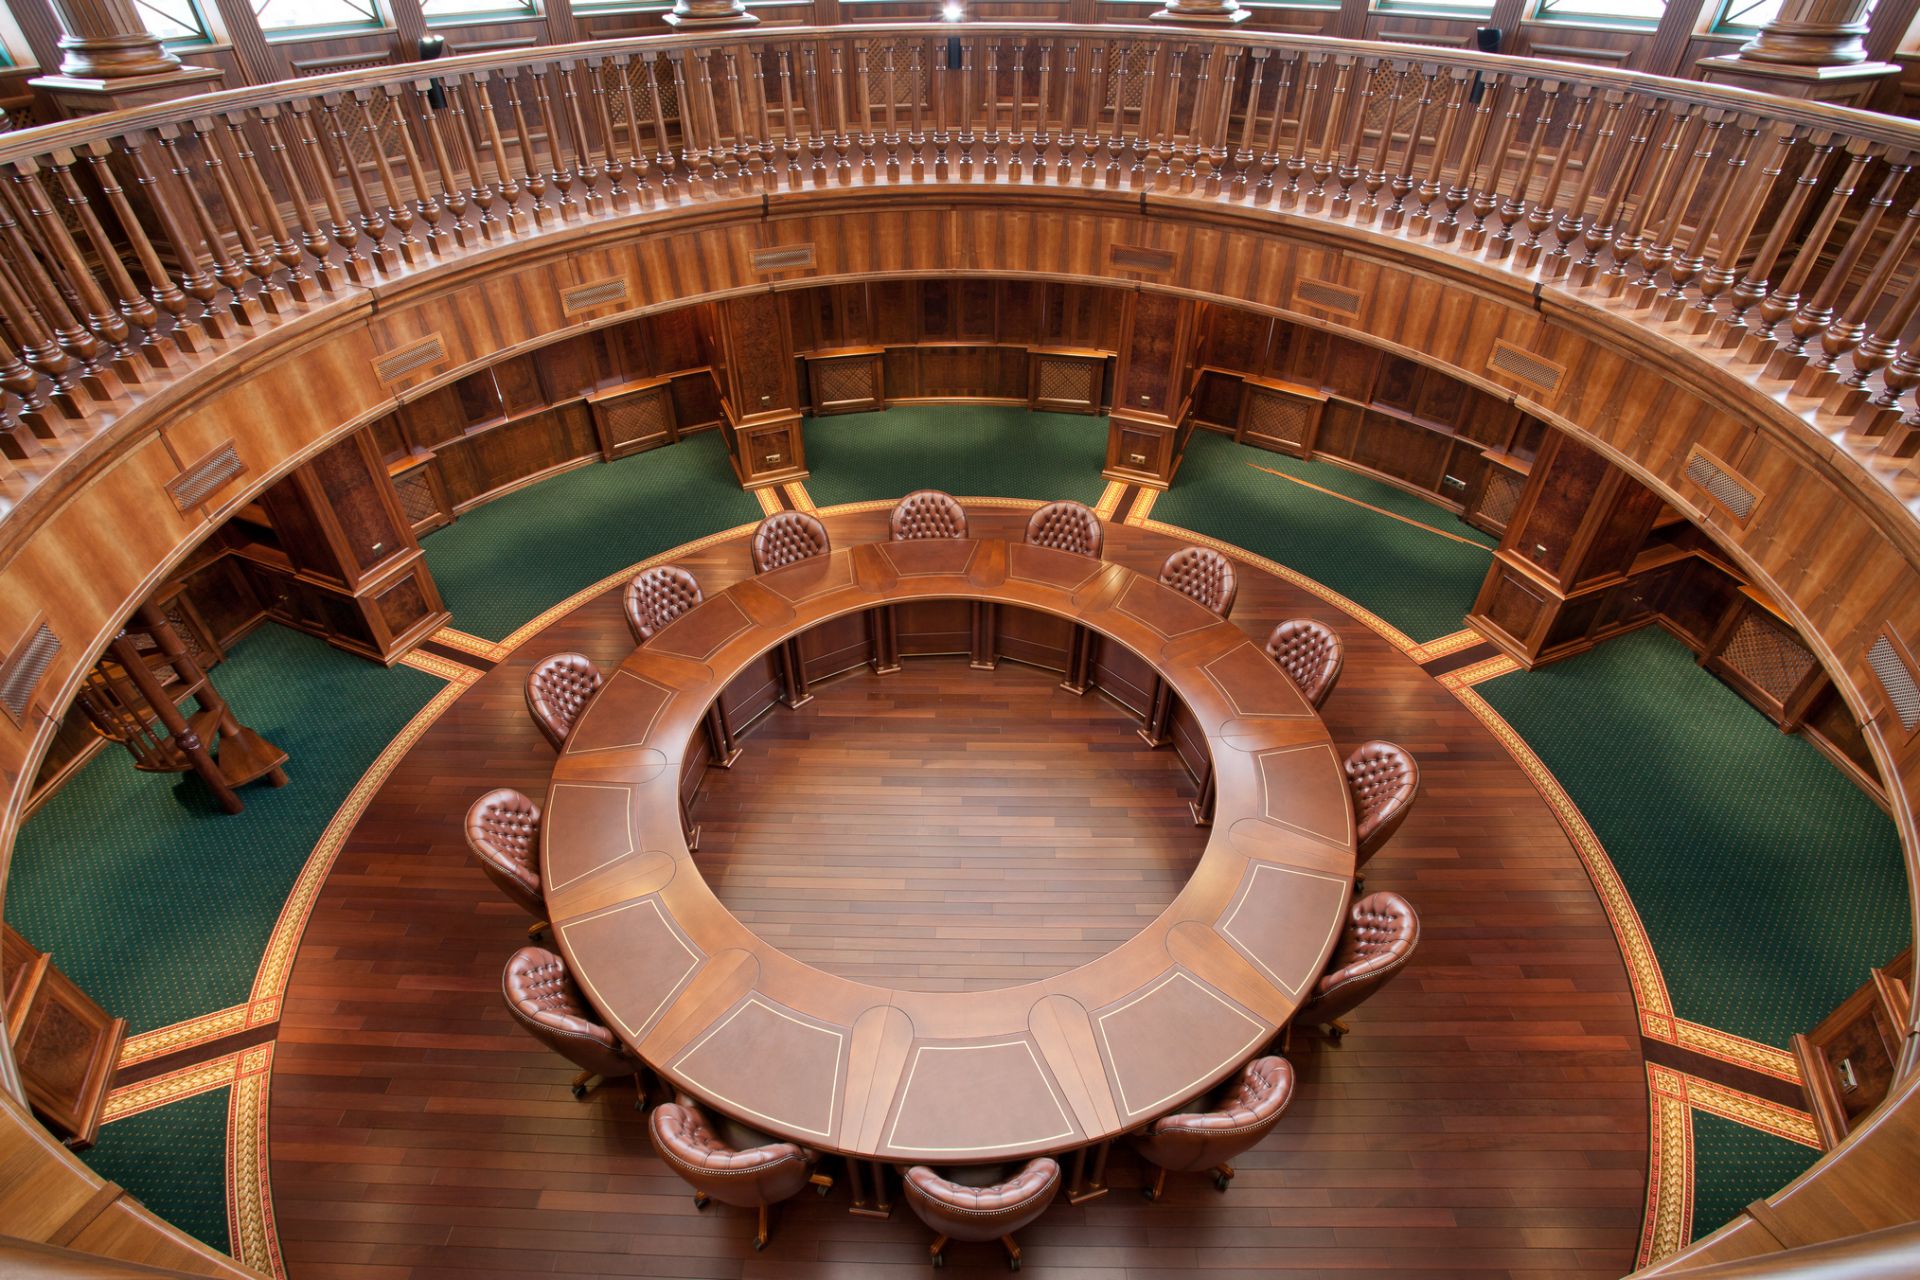 Wooden round table in the library of Arcada Bank